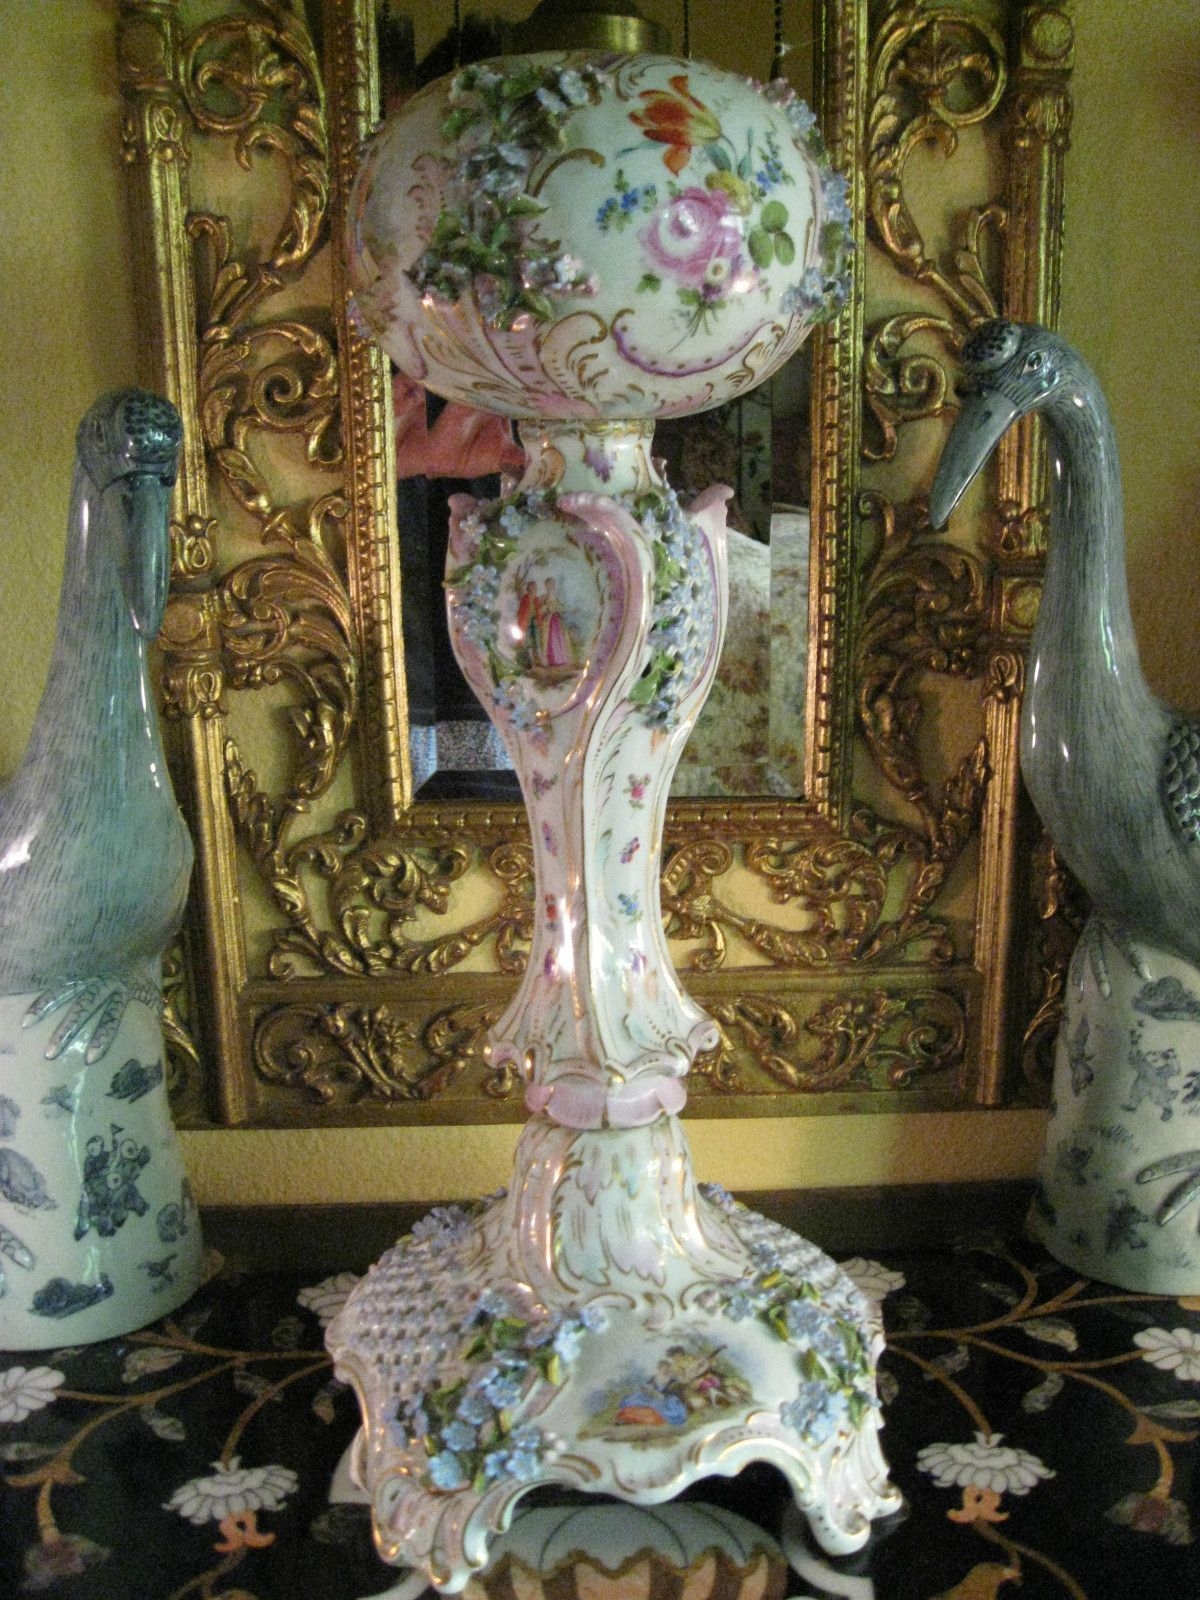 Superb Detailed Porcelain Antique Lamp By Carl Thieme Late 19th Century Lovely